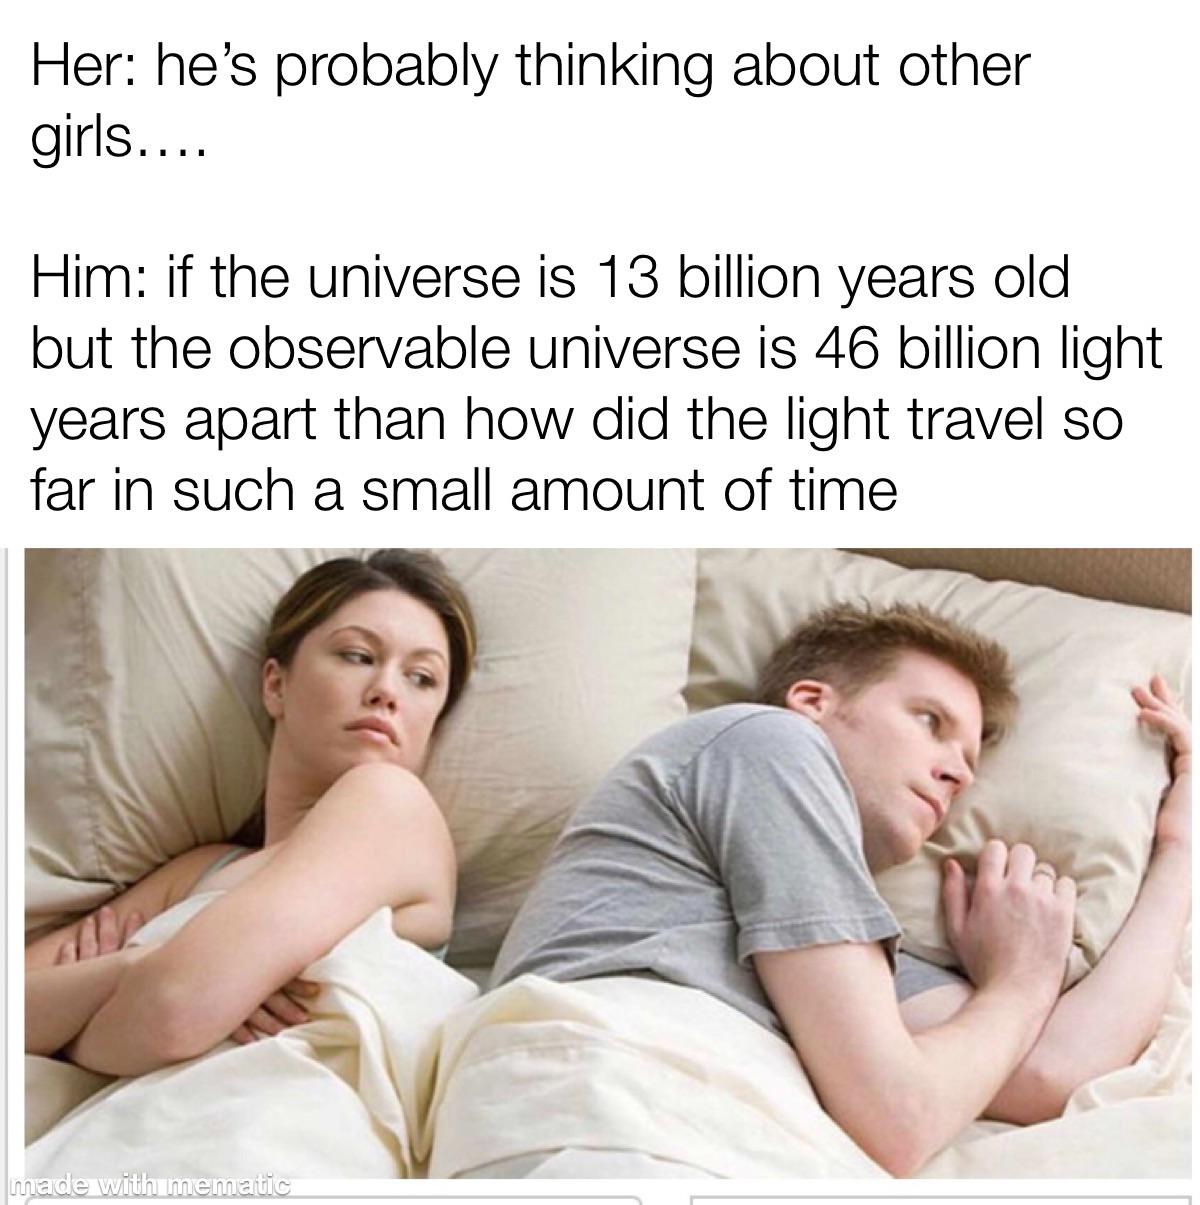 bet he's thinking about other girls meme template - Her he's probably thinking about other girls.... Him if the universe is 13 billion years old but the observable universe is 46 billion light years apart than how did the light travel so far in such a sma